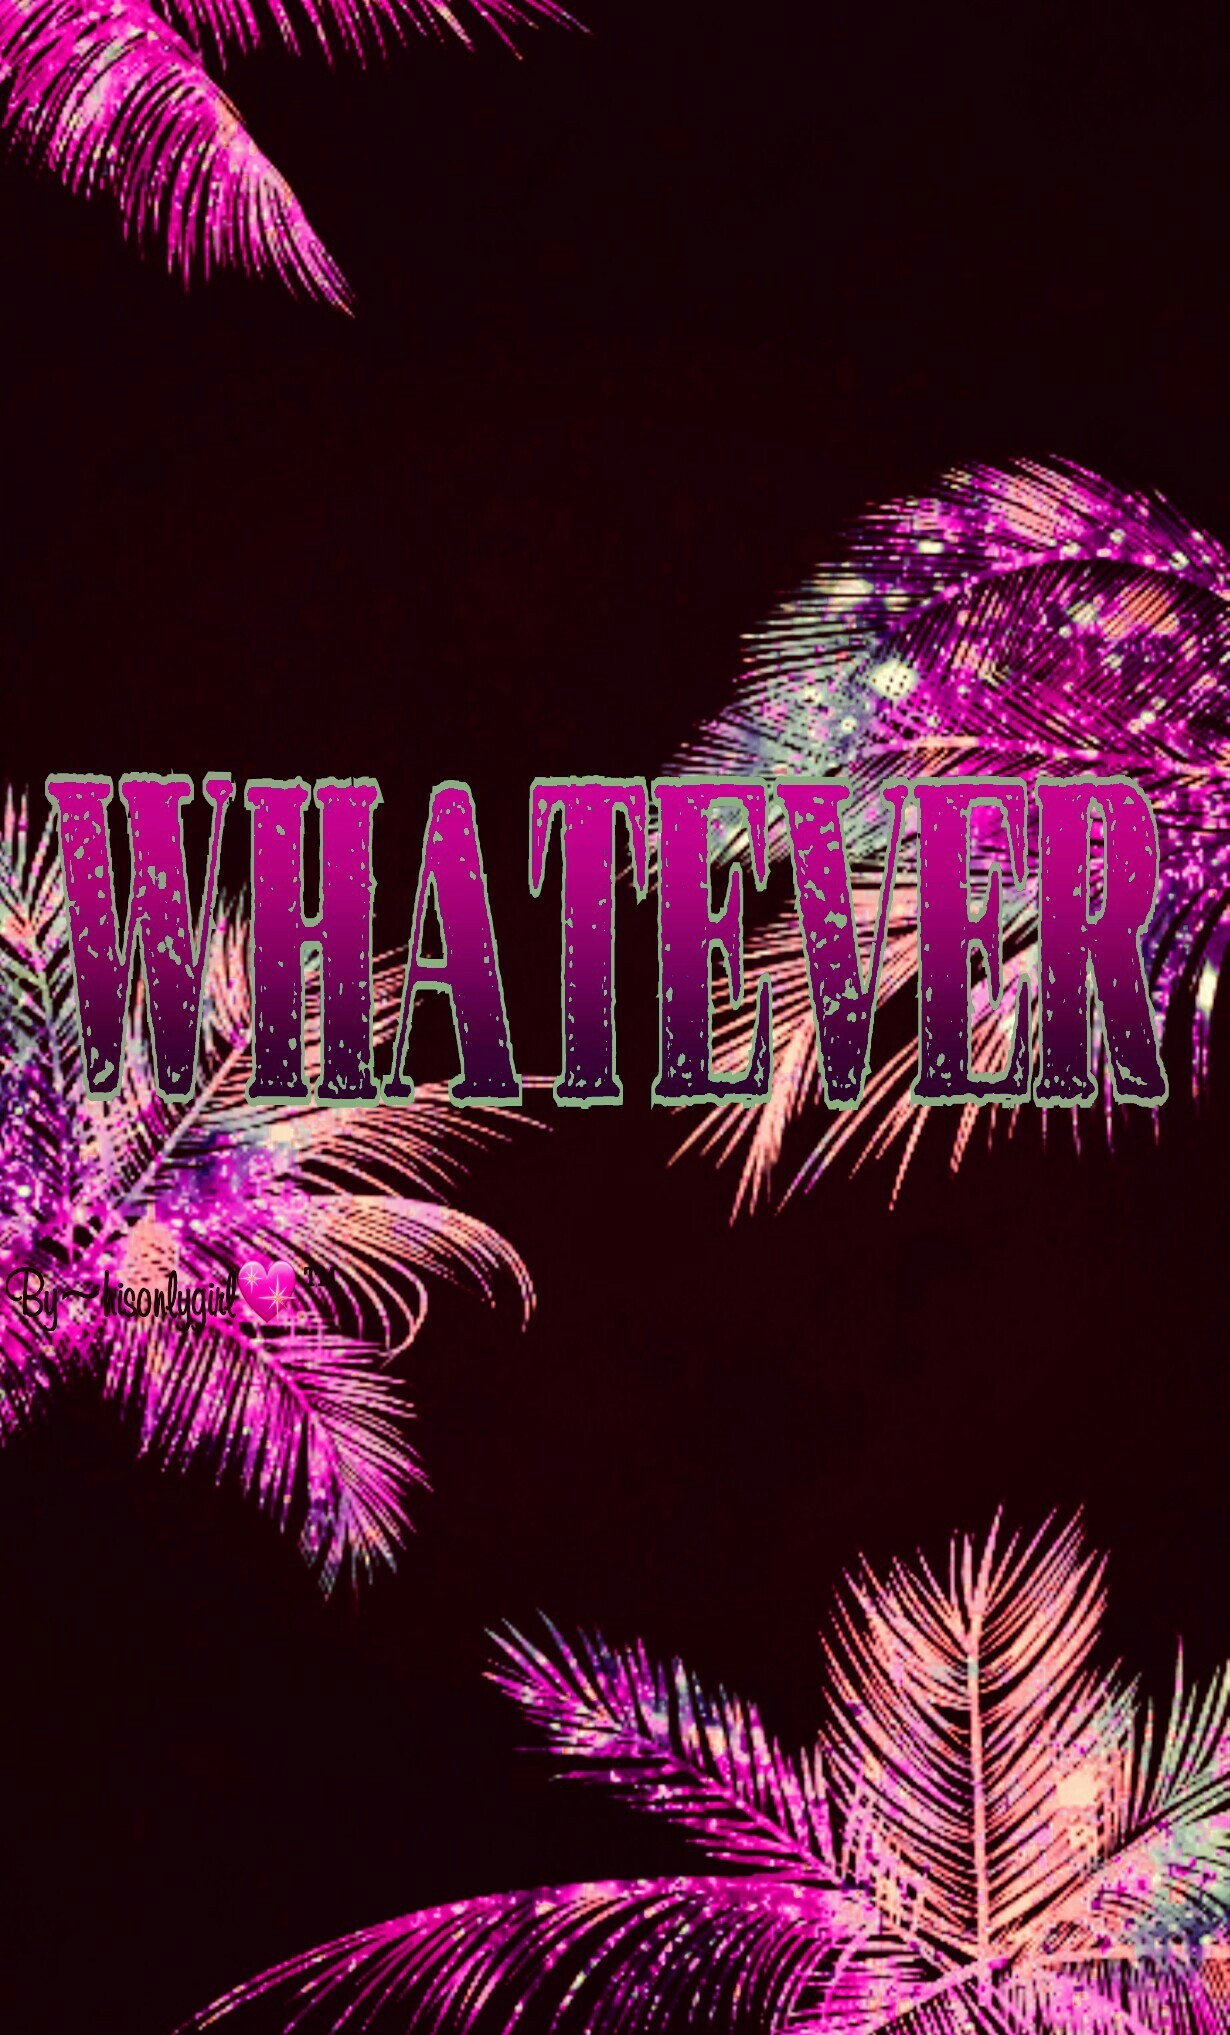 1230x2035 "Whatever" pink & brown galaxy wallpaper I ...